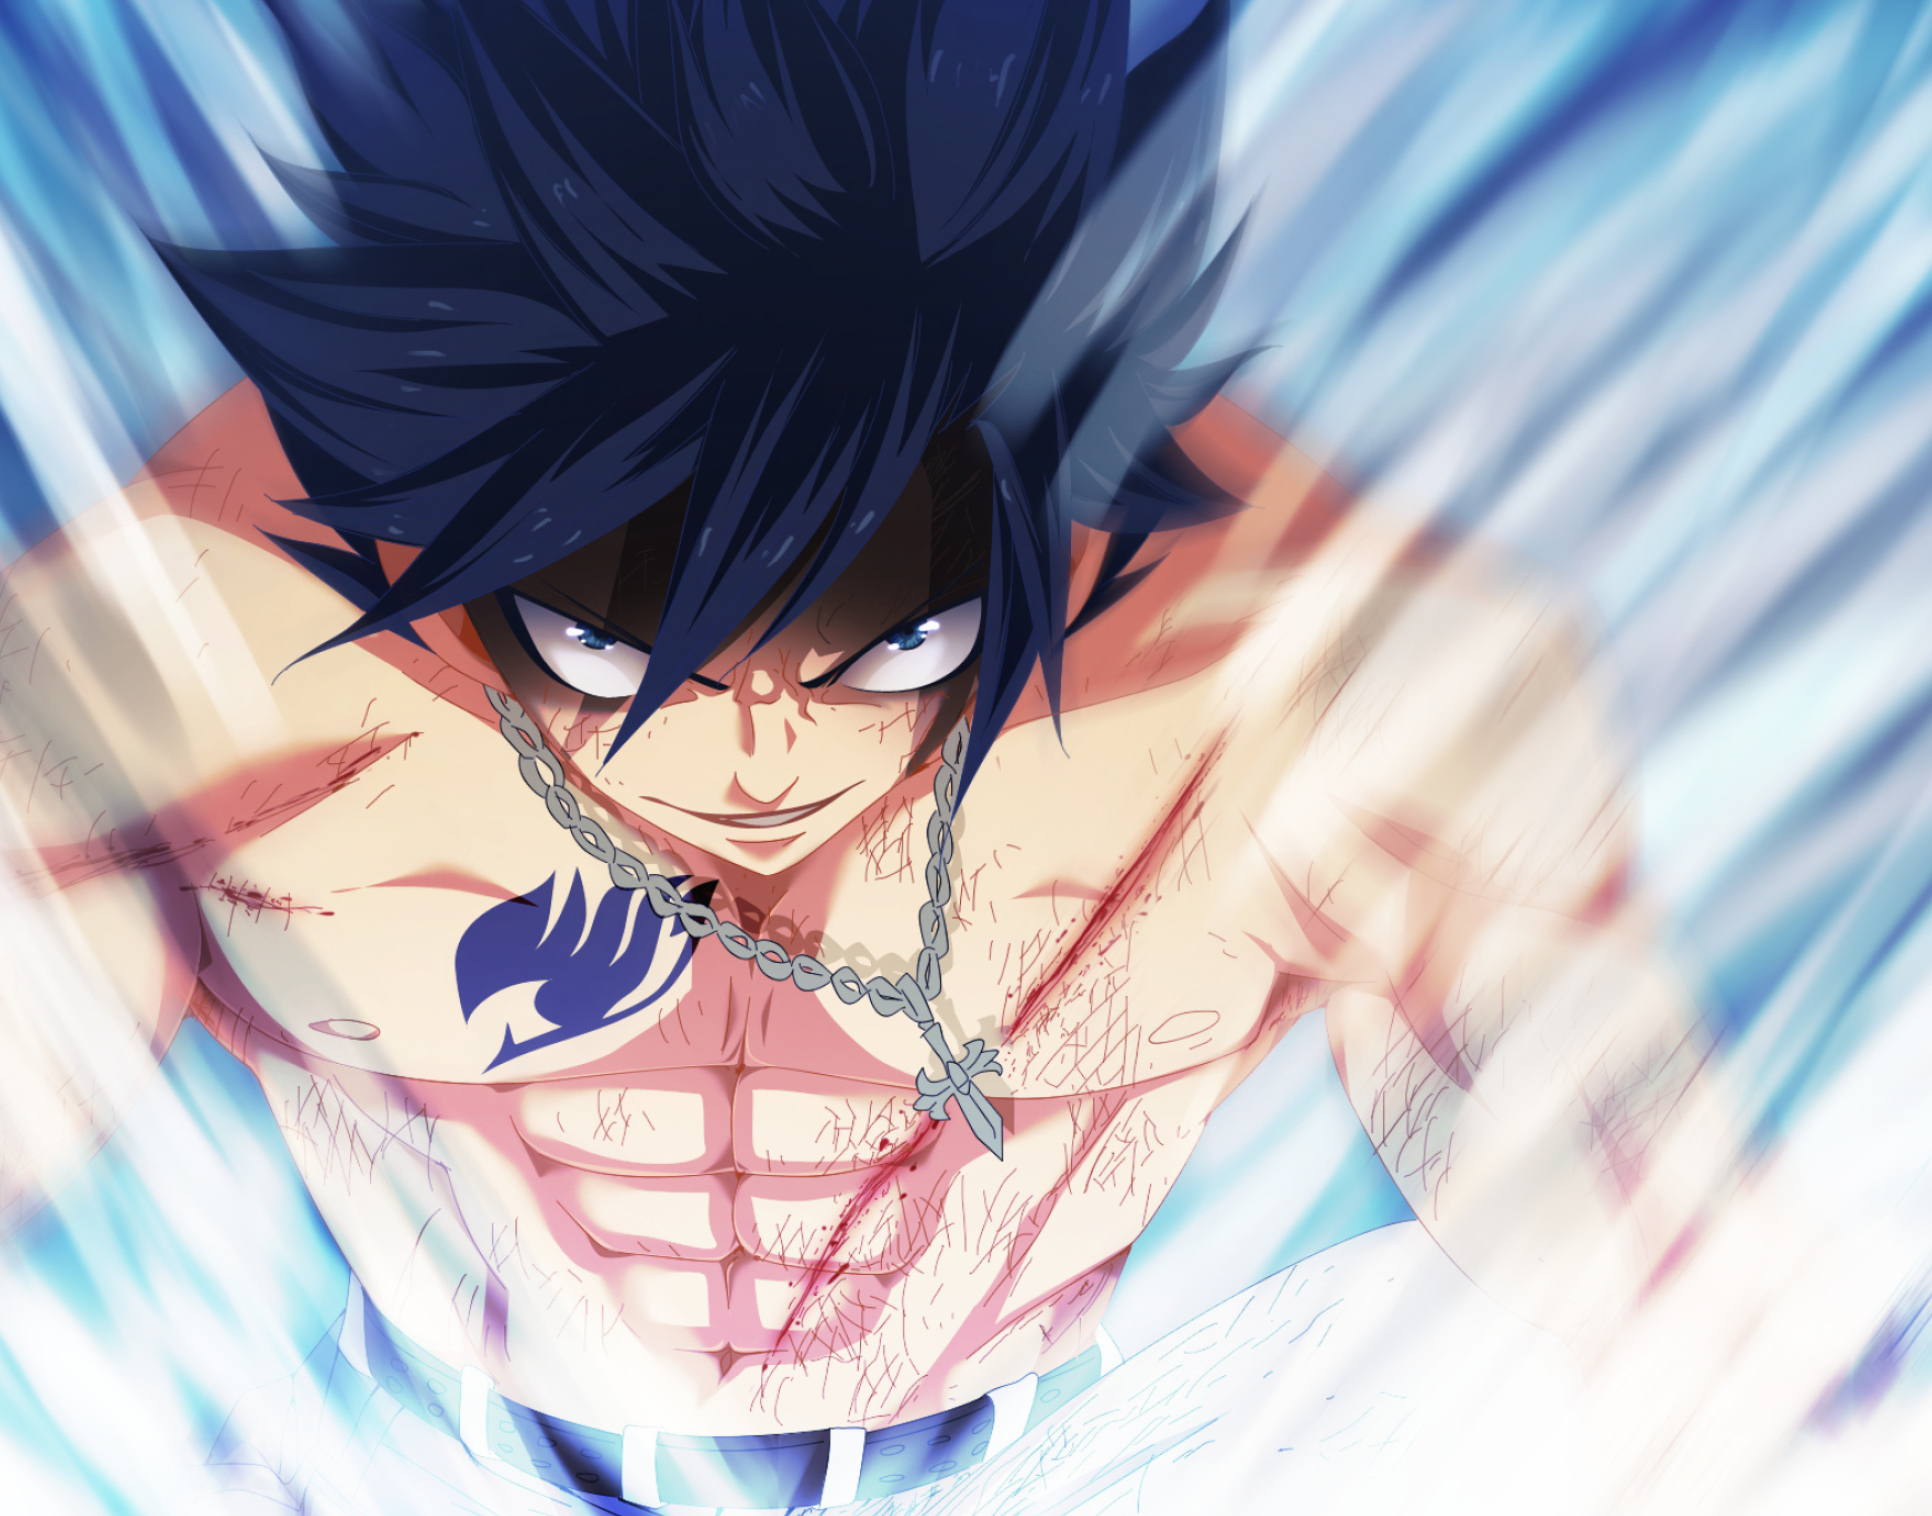 Gray Fullbuster, HD wallpapers and backgrounds, 1940x1520 HD Desktop